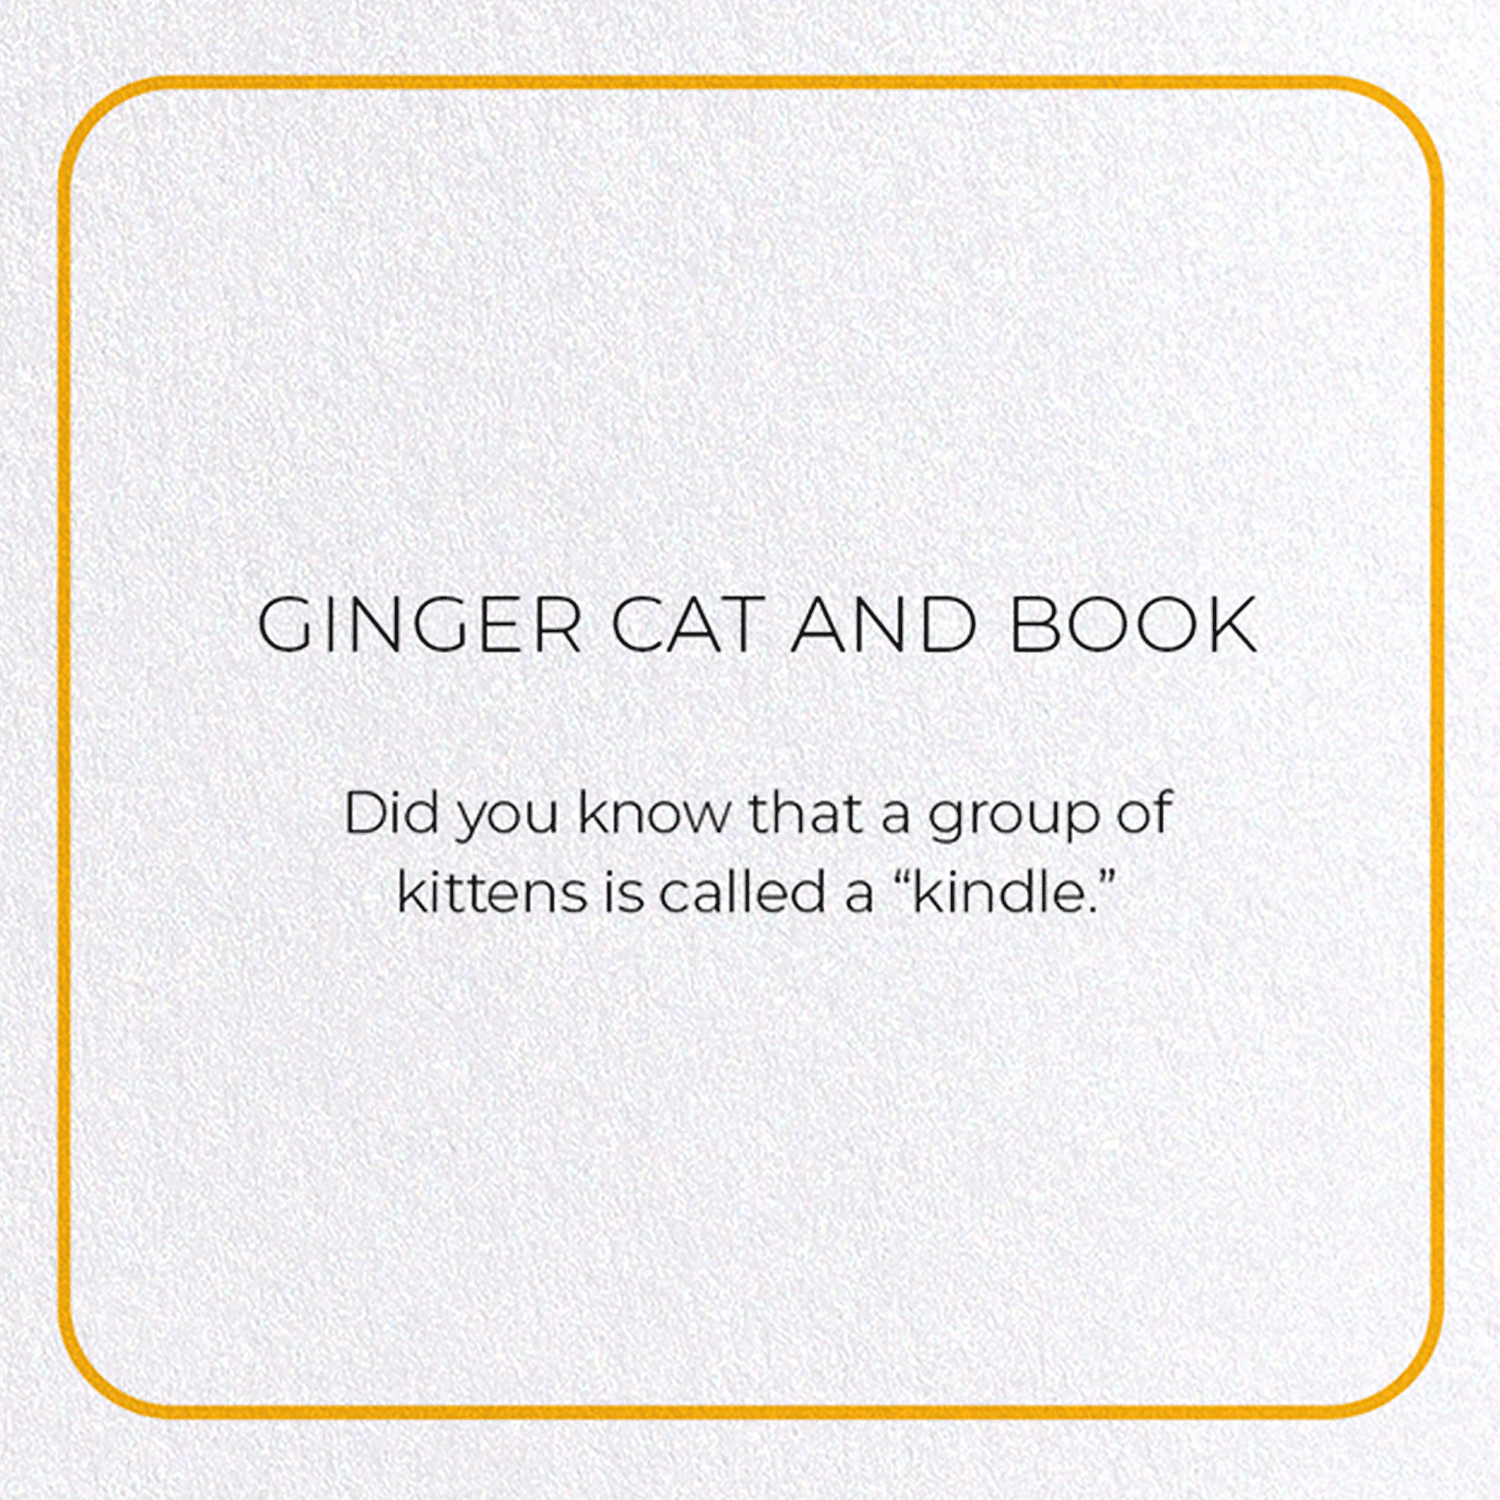 GINGER CAT AND BOOK